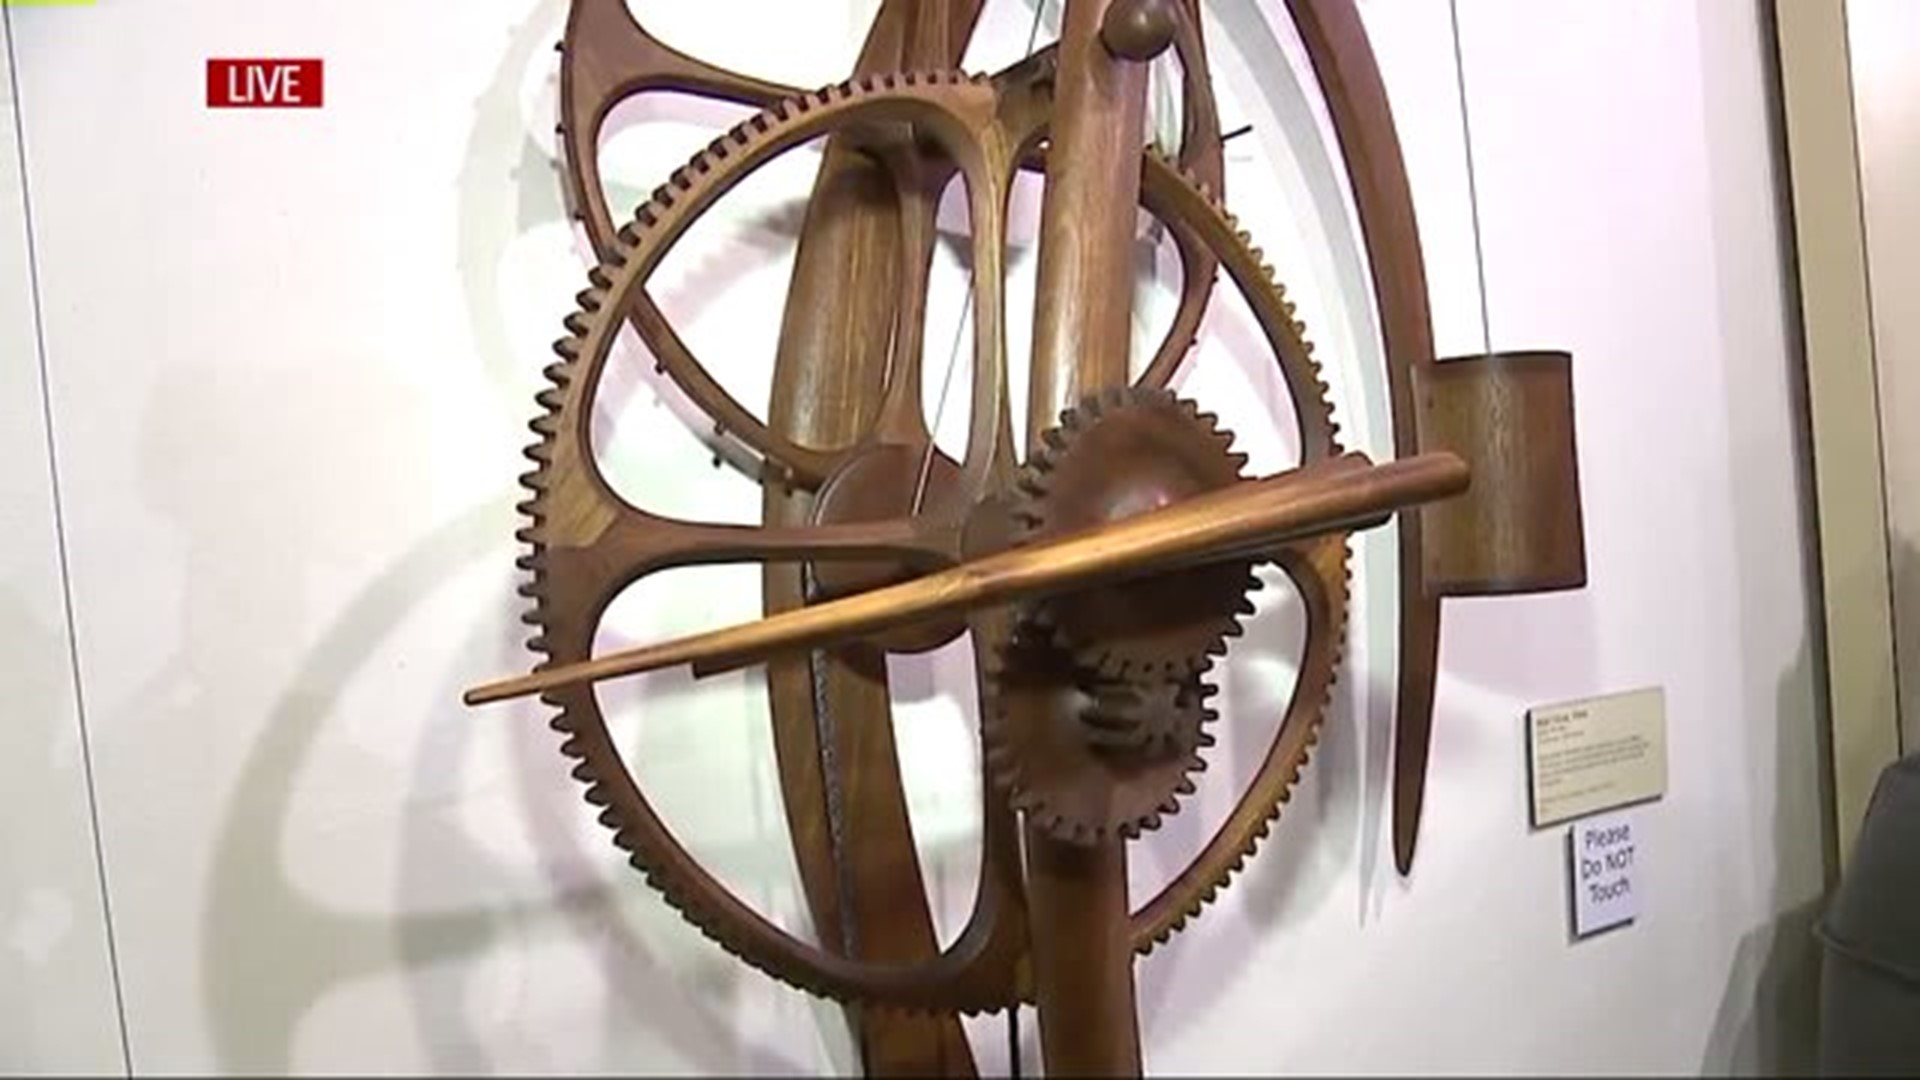 A clock damaged in a viral video is repaired and back on display at the Watch and Clock Museum in Lancaster